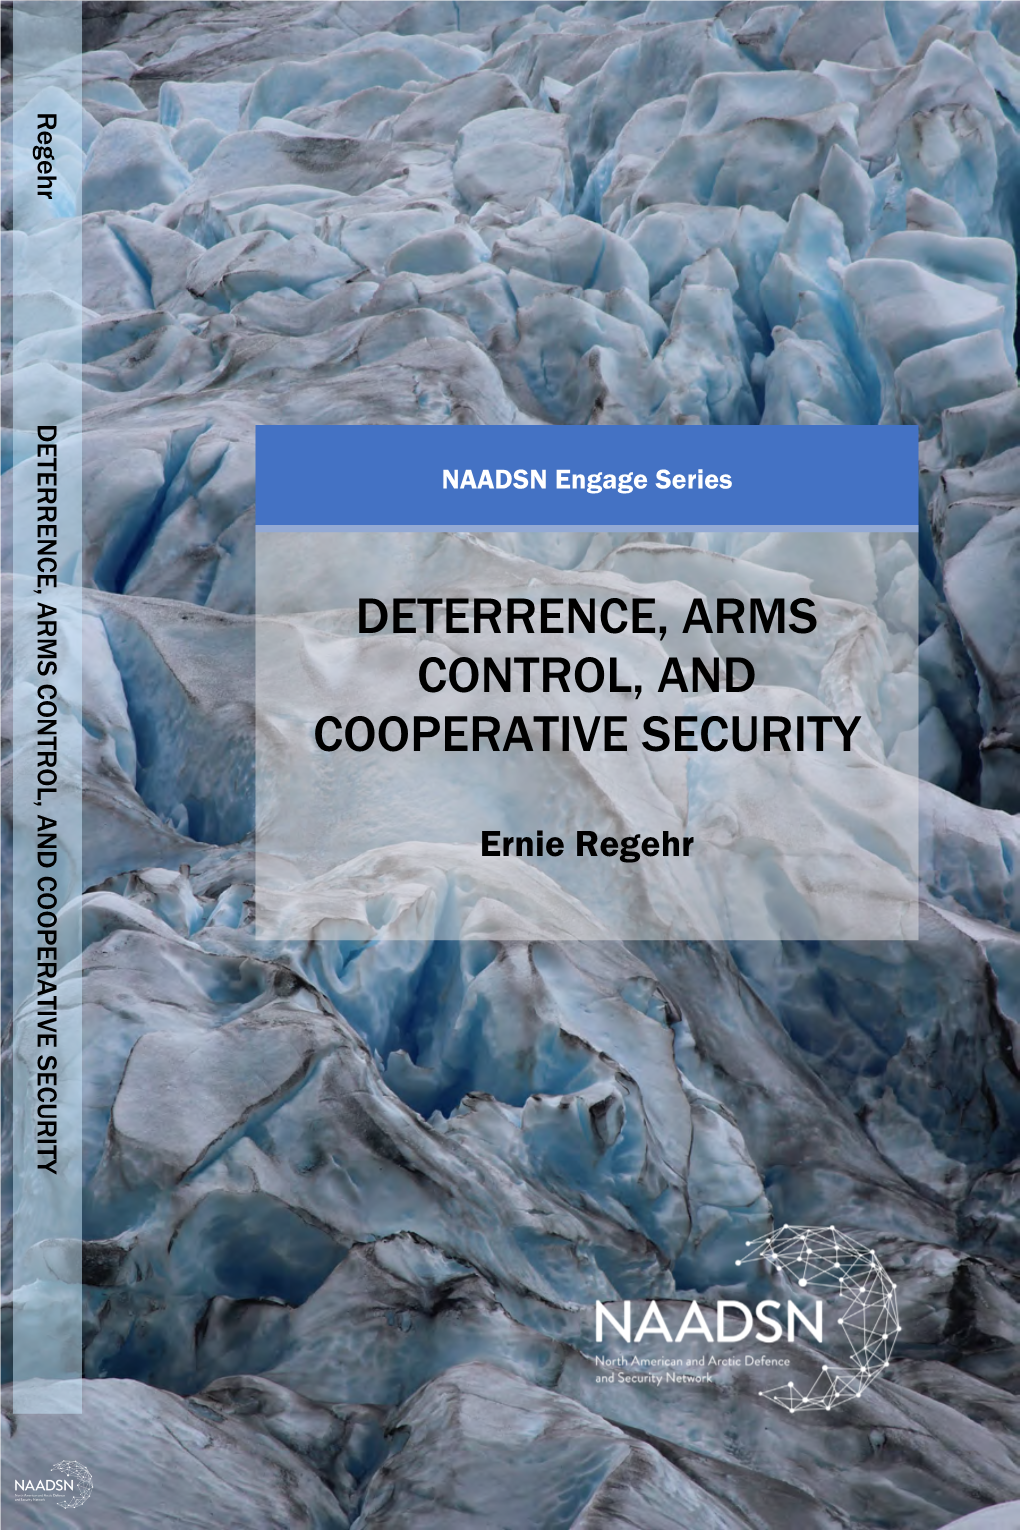 Deterrence, Arms Control, and Cooperative Security